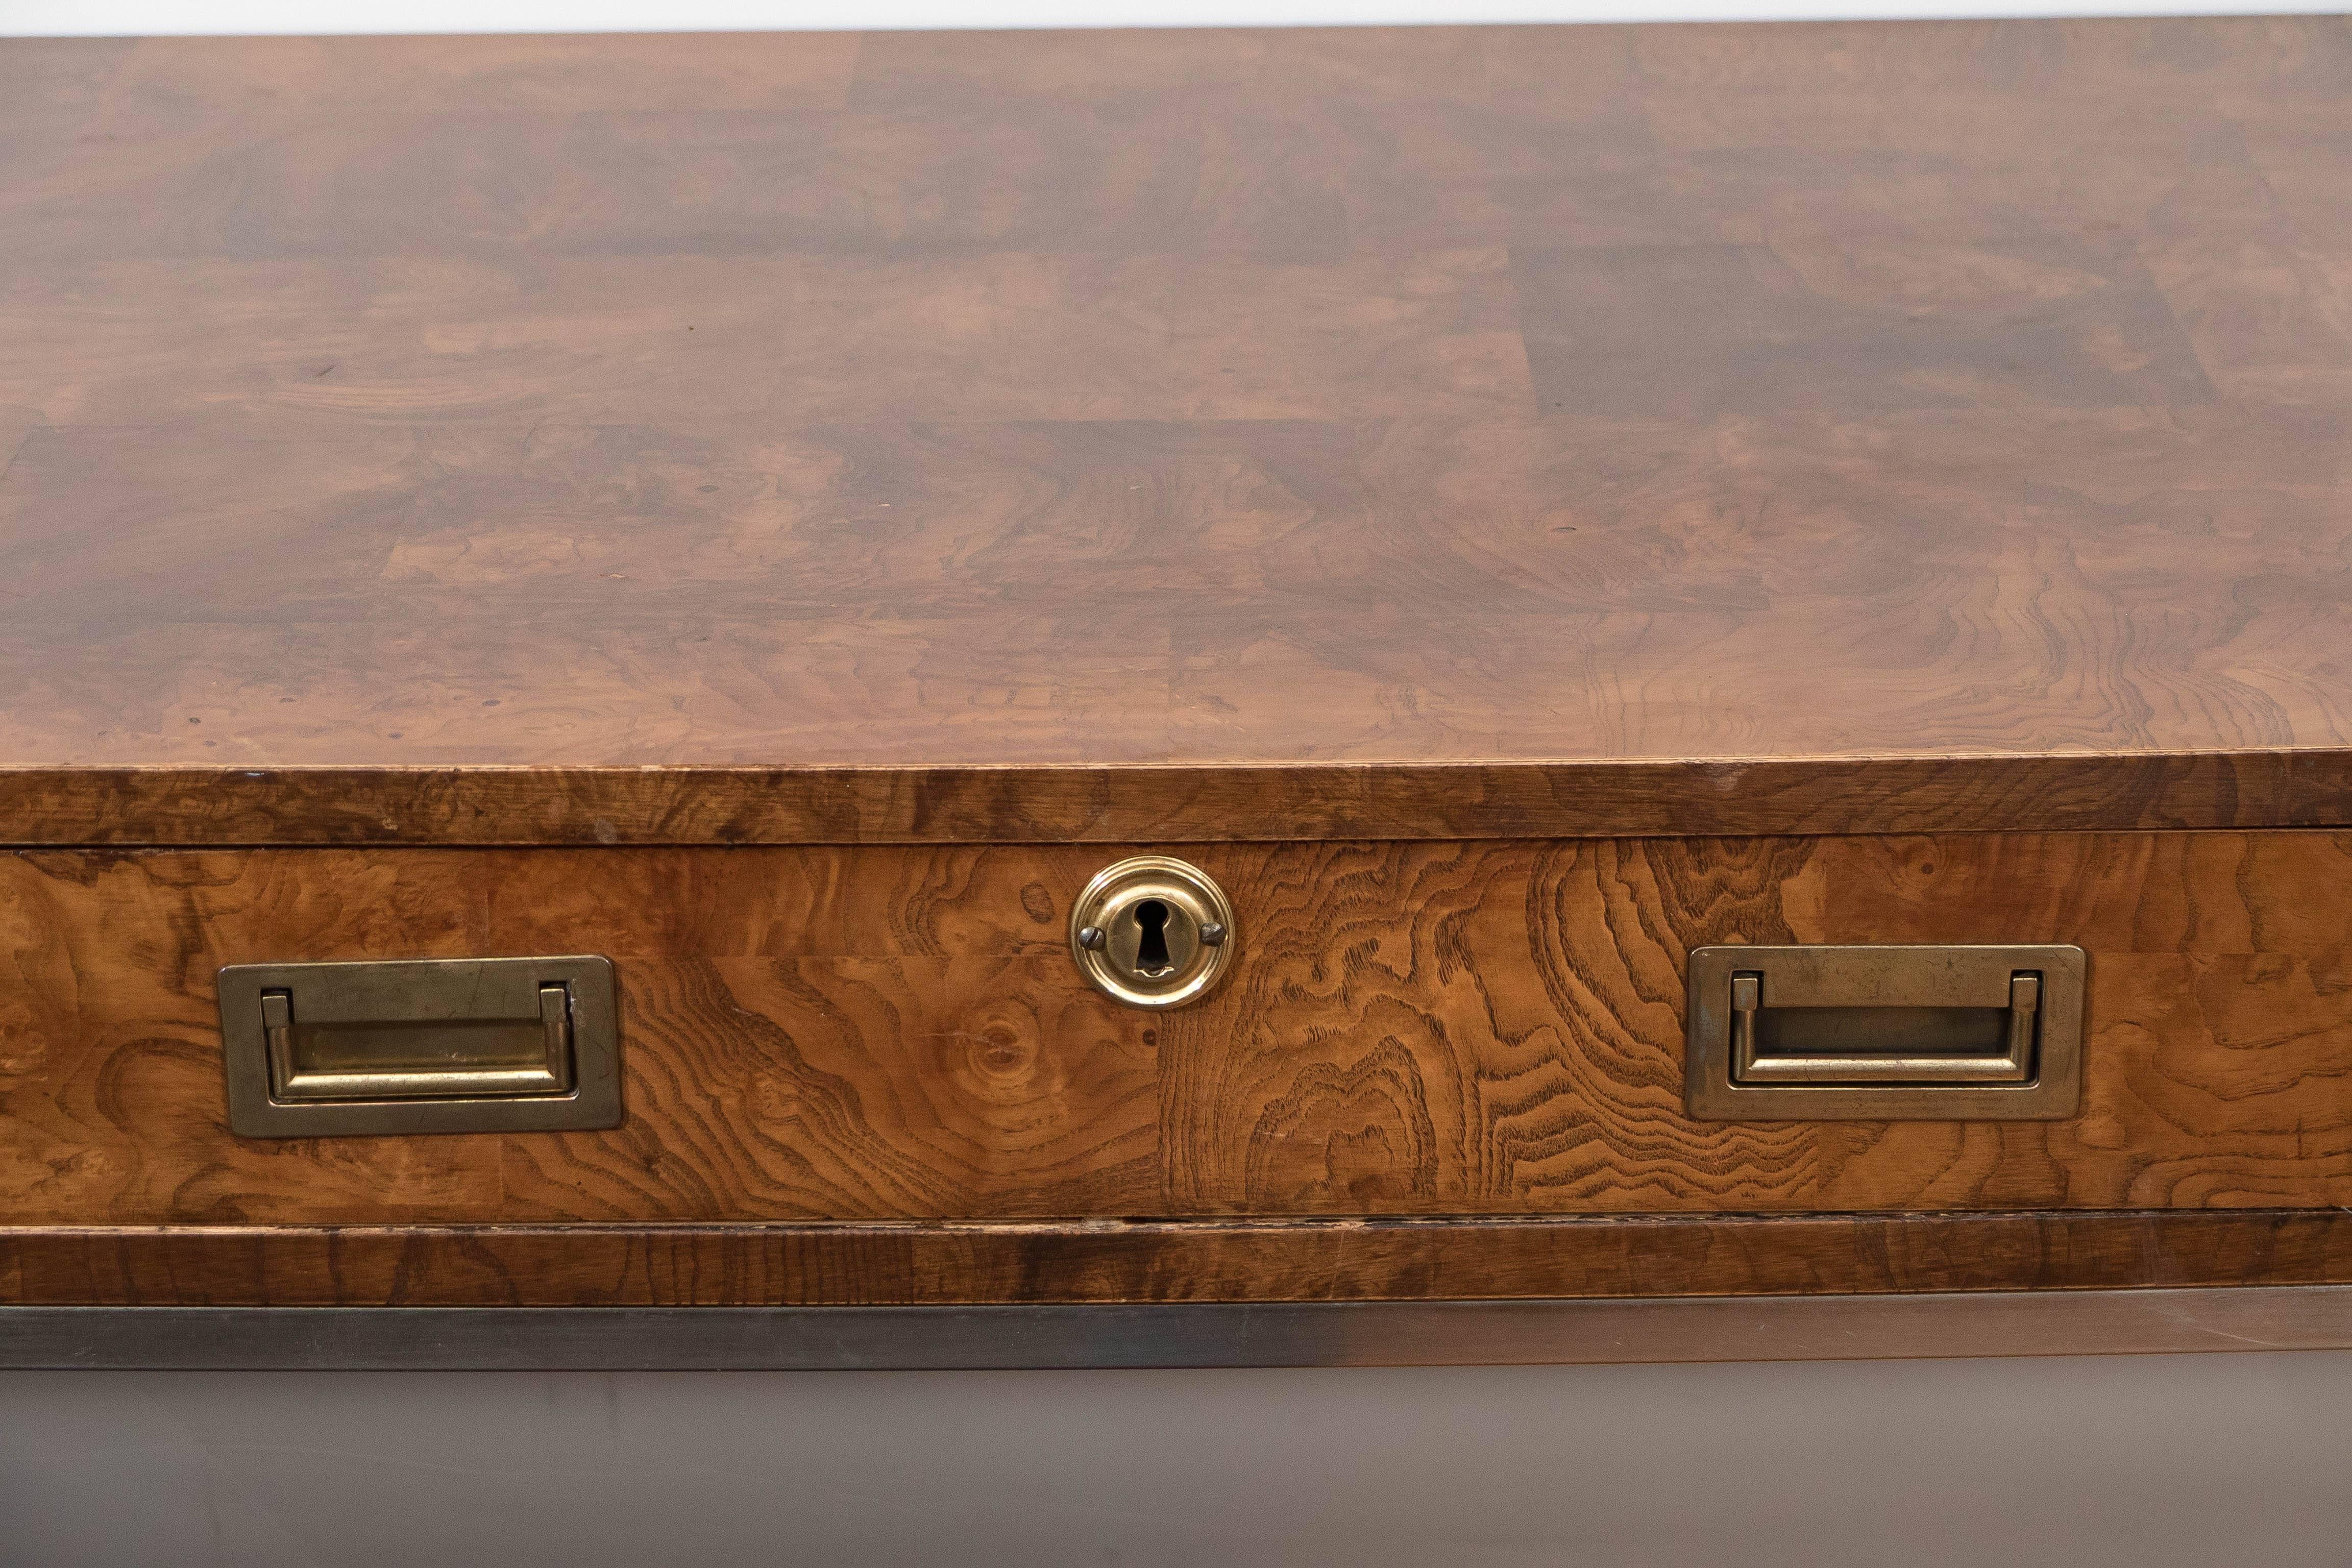 A campaign style desk, produced circa 1960s by Bernhardt furniture company, veneered in panels of highly detailed wood with brass accents, including three drawers with recessed handles, escutcheon to center, on highly linear metal base. Markings